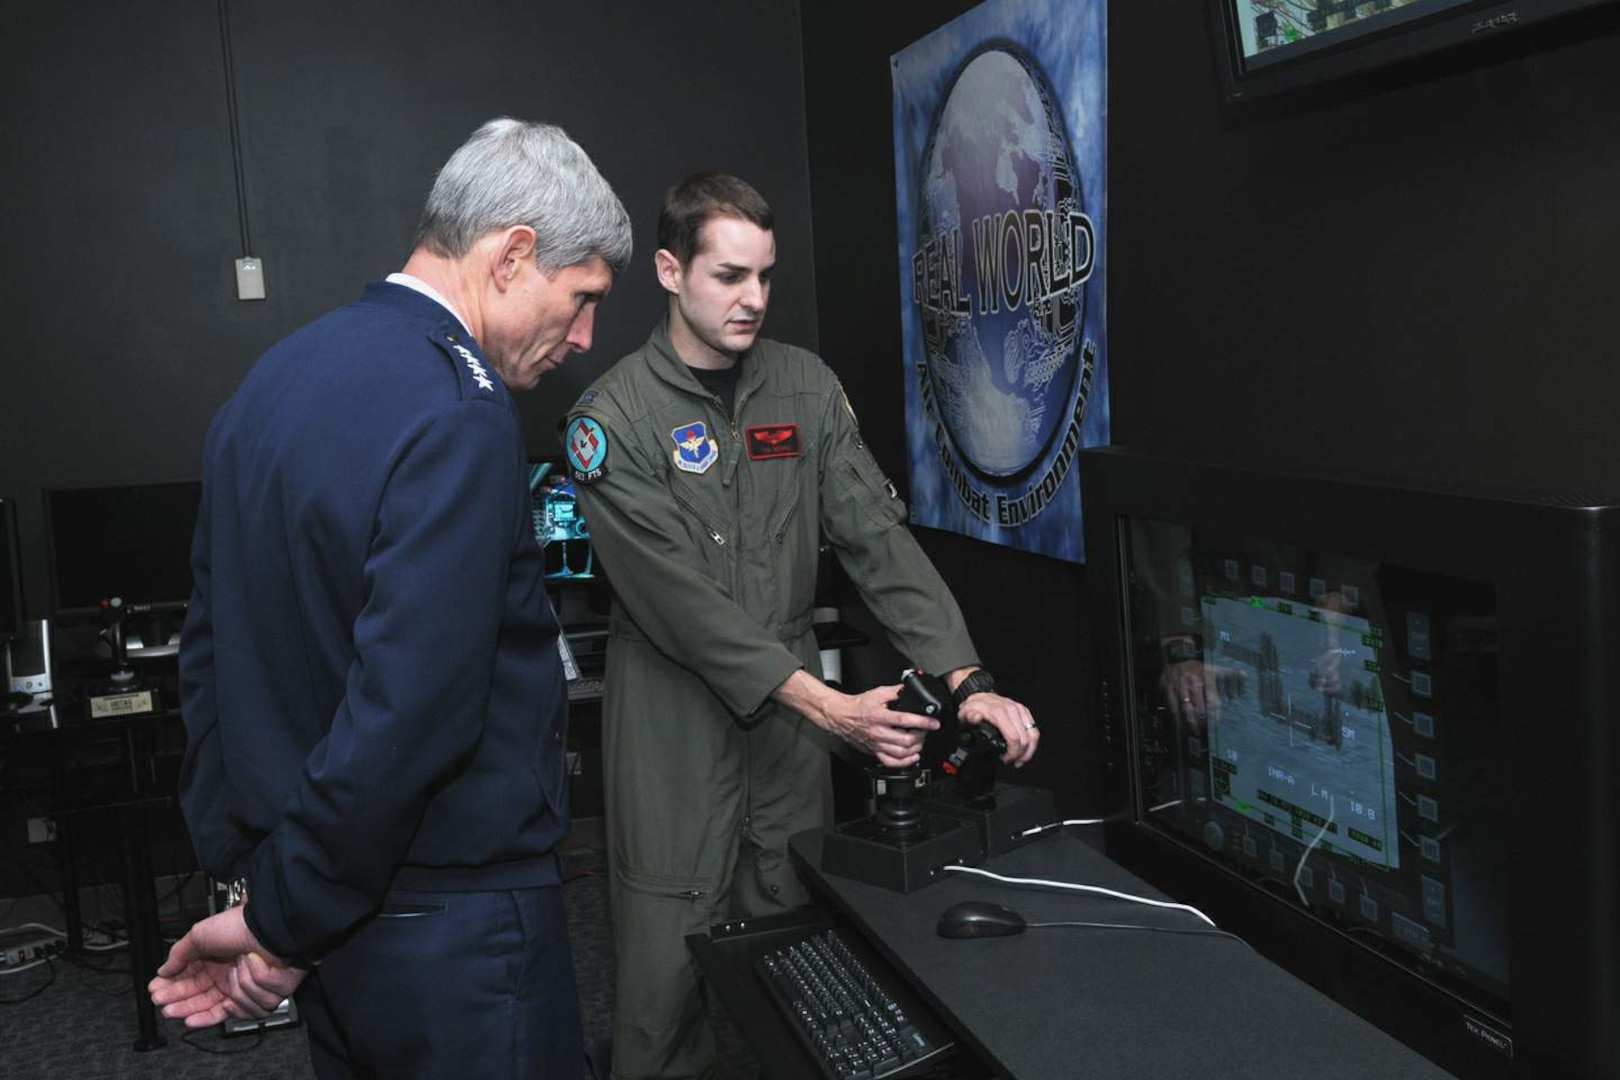 Air Force Chief of Staff Gen. Norton Schwartz observes as Capt. Tom Moore, a Unmanned Aircraft System Fundamentals Course flight commander, demonstrates a training position in the Simulation Development Laboratory Feb. 19 during the general's visit to the 563rd Flying Training Squadron at Randolph Air Force Base, Texas. (U.S. Air Force photo/Joel Martinez)